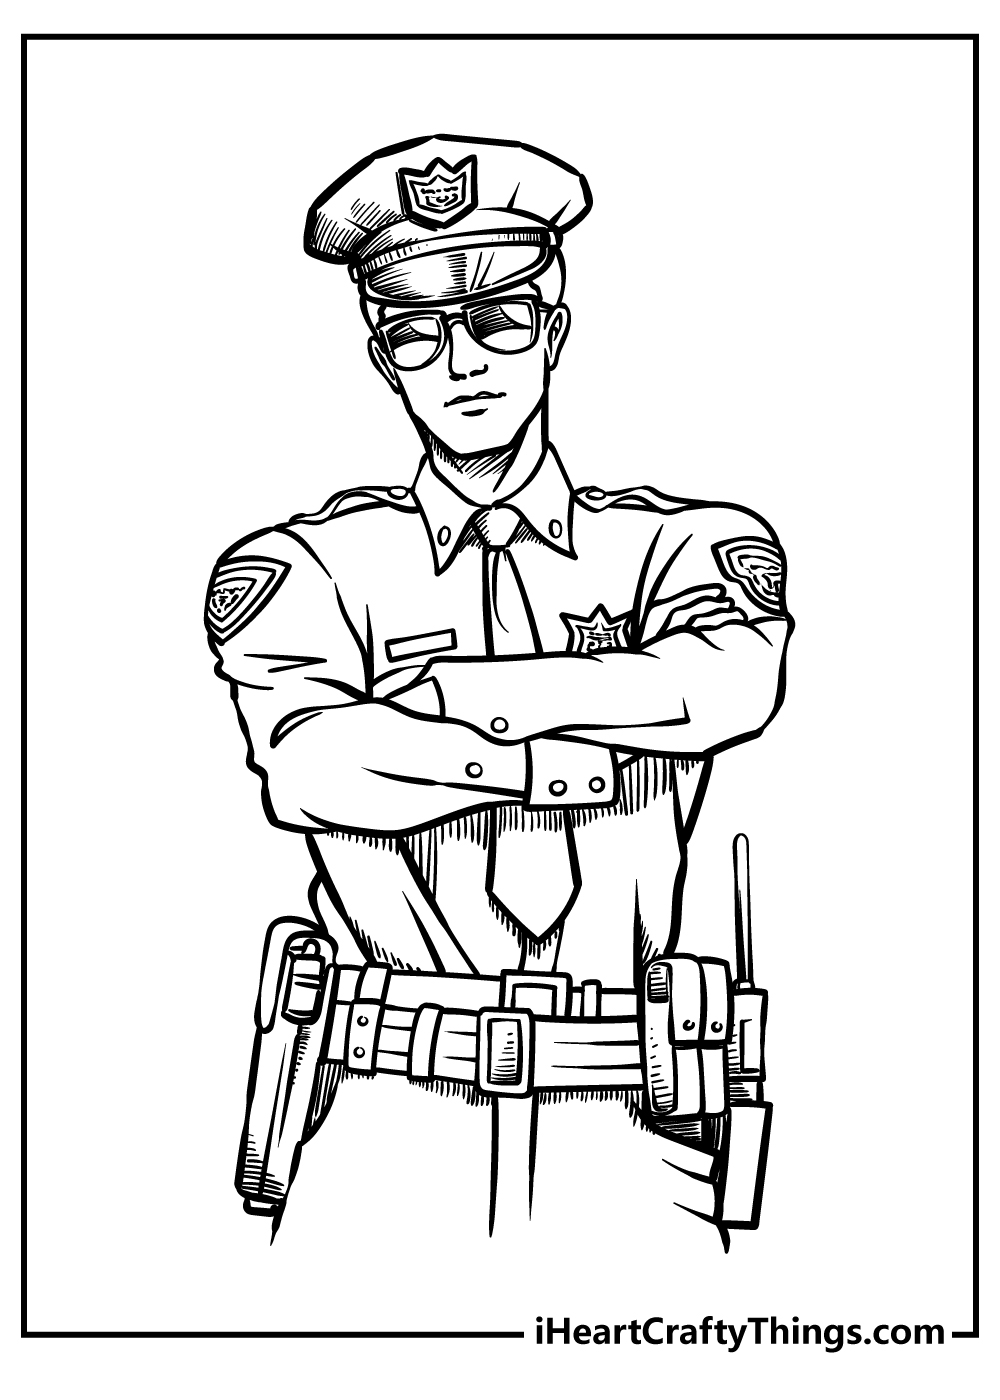 Police coloring pages free printables